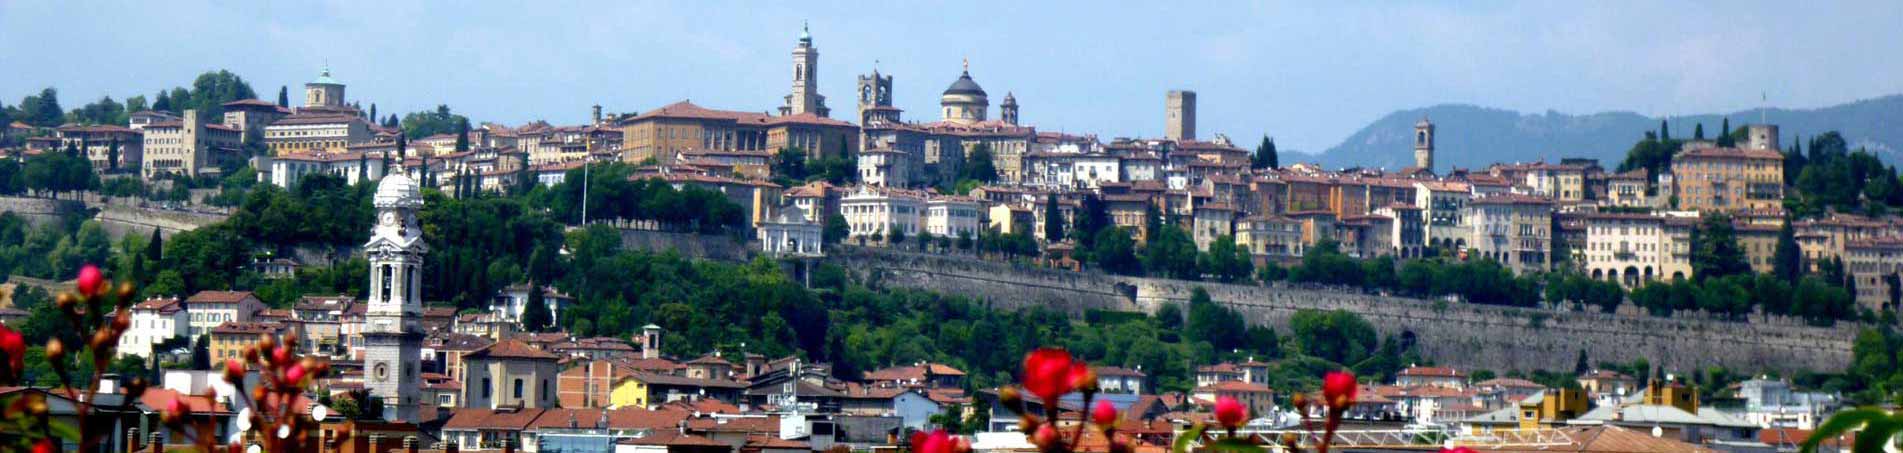 SIGHTSEEING IN BERGAMO AND THE SURROUNDING AREA